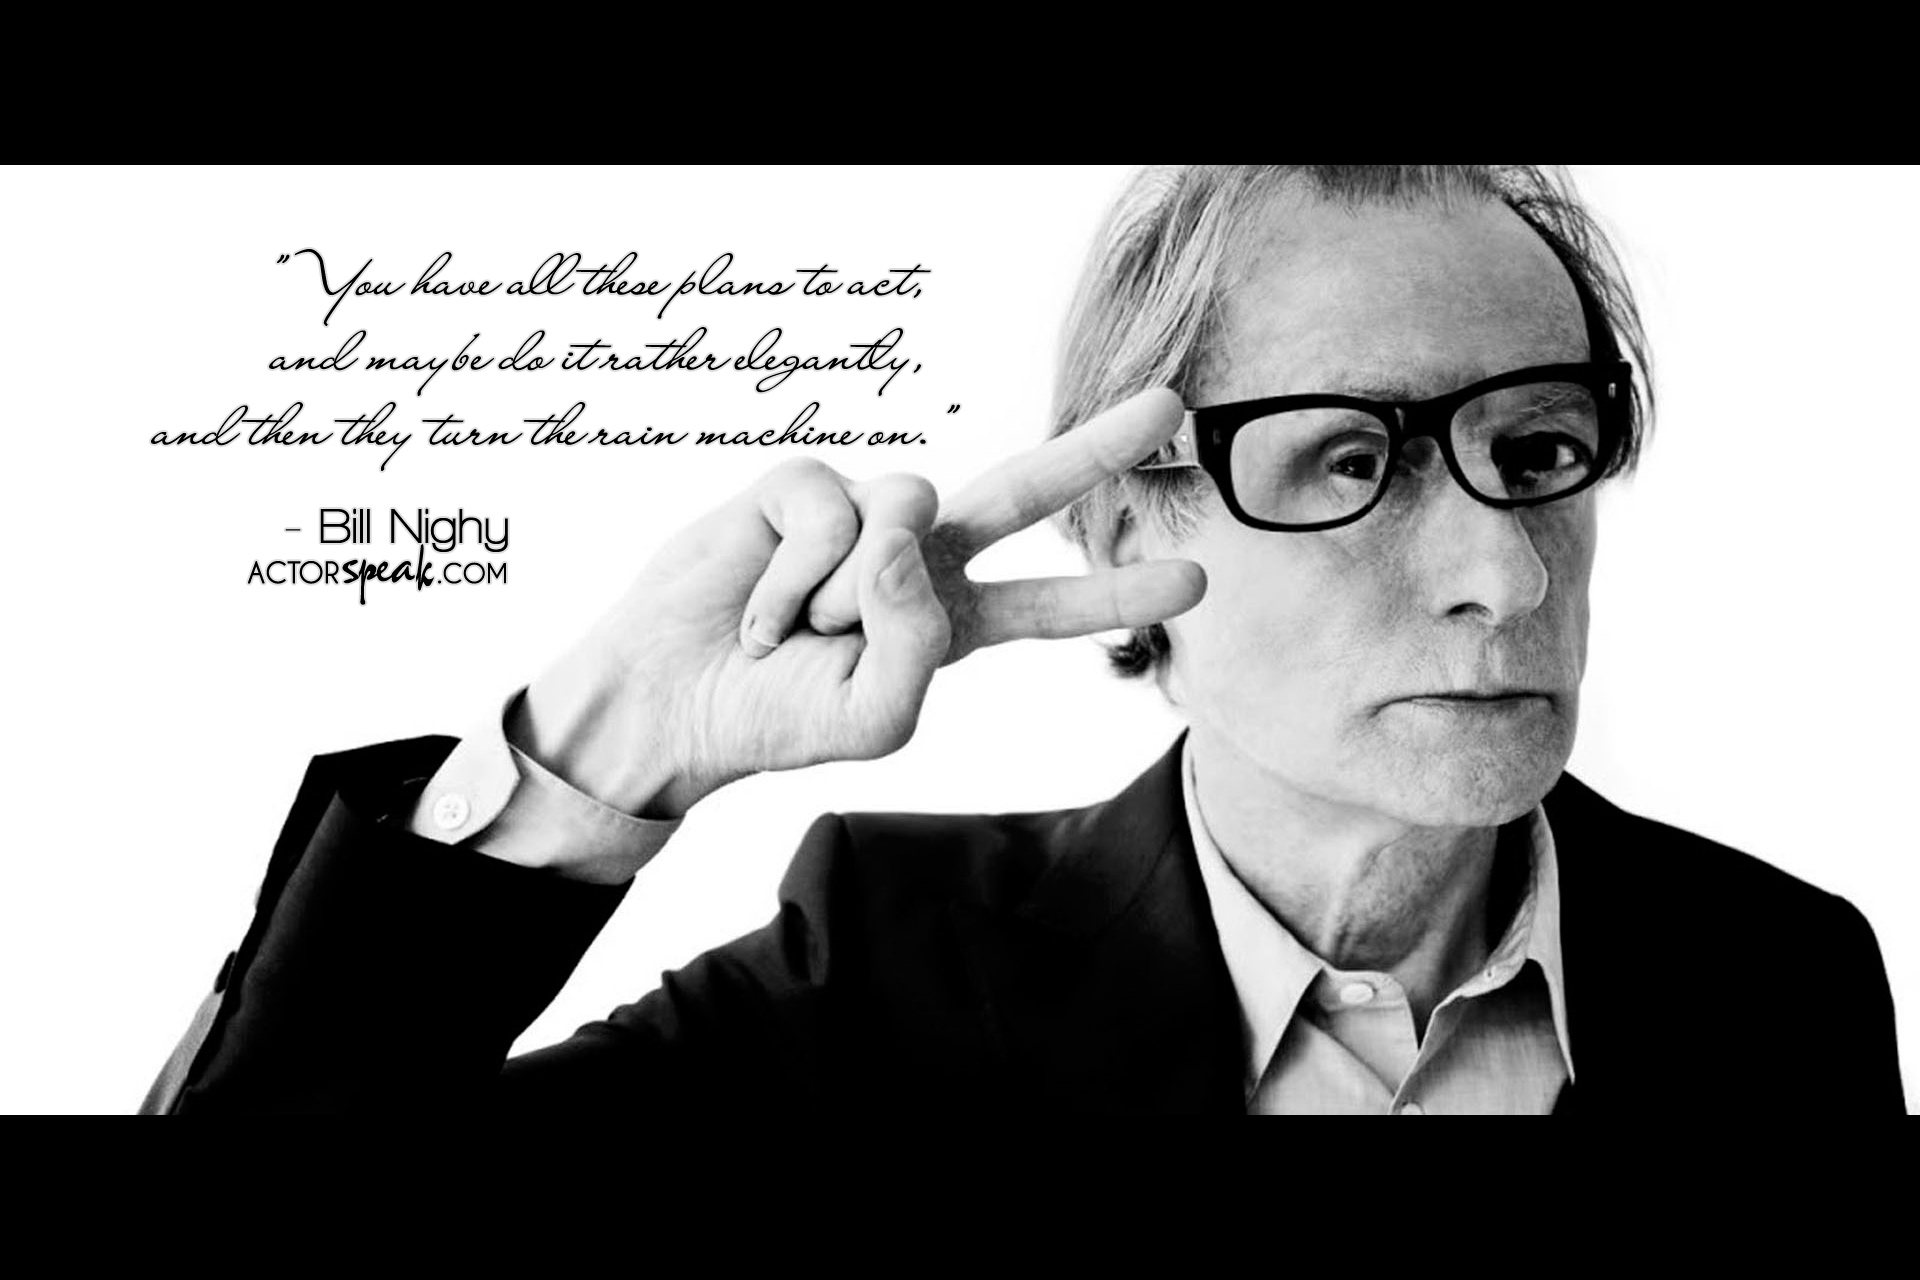 Bill Nighy's quote